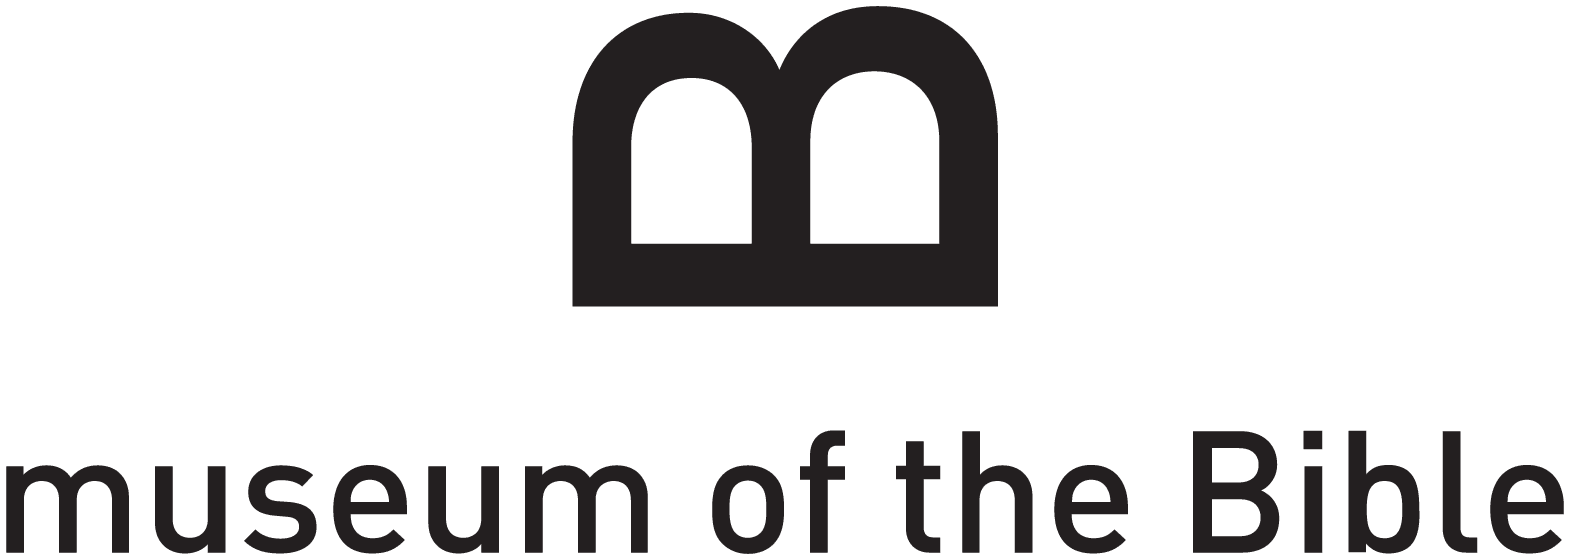 FreeAxez Client - Museum of the Bible Logo